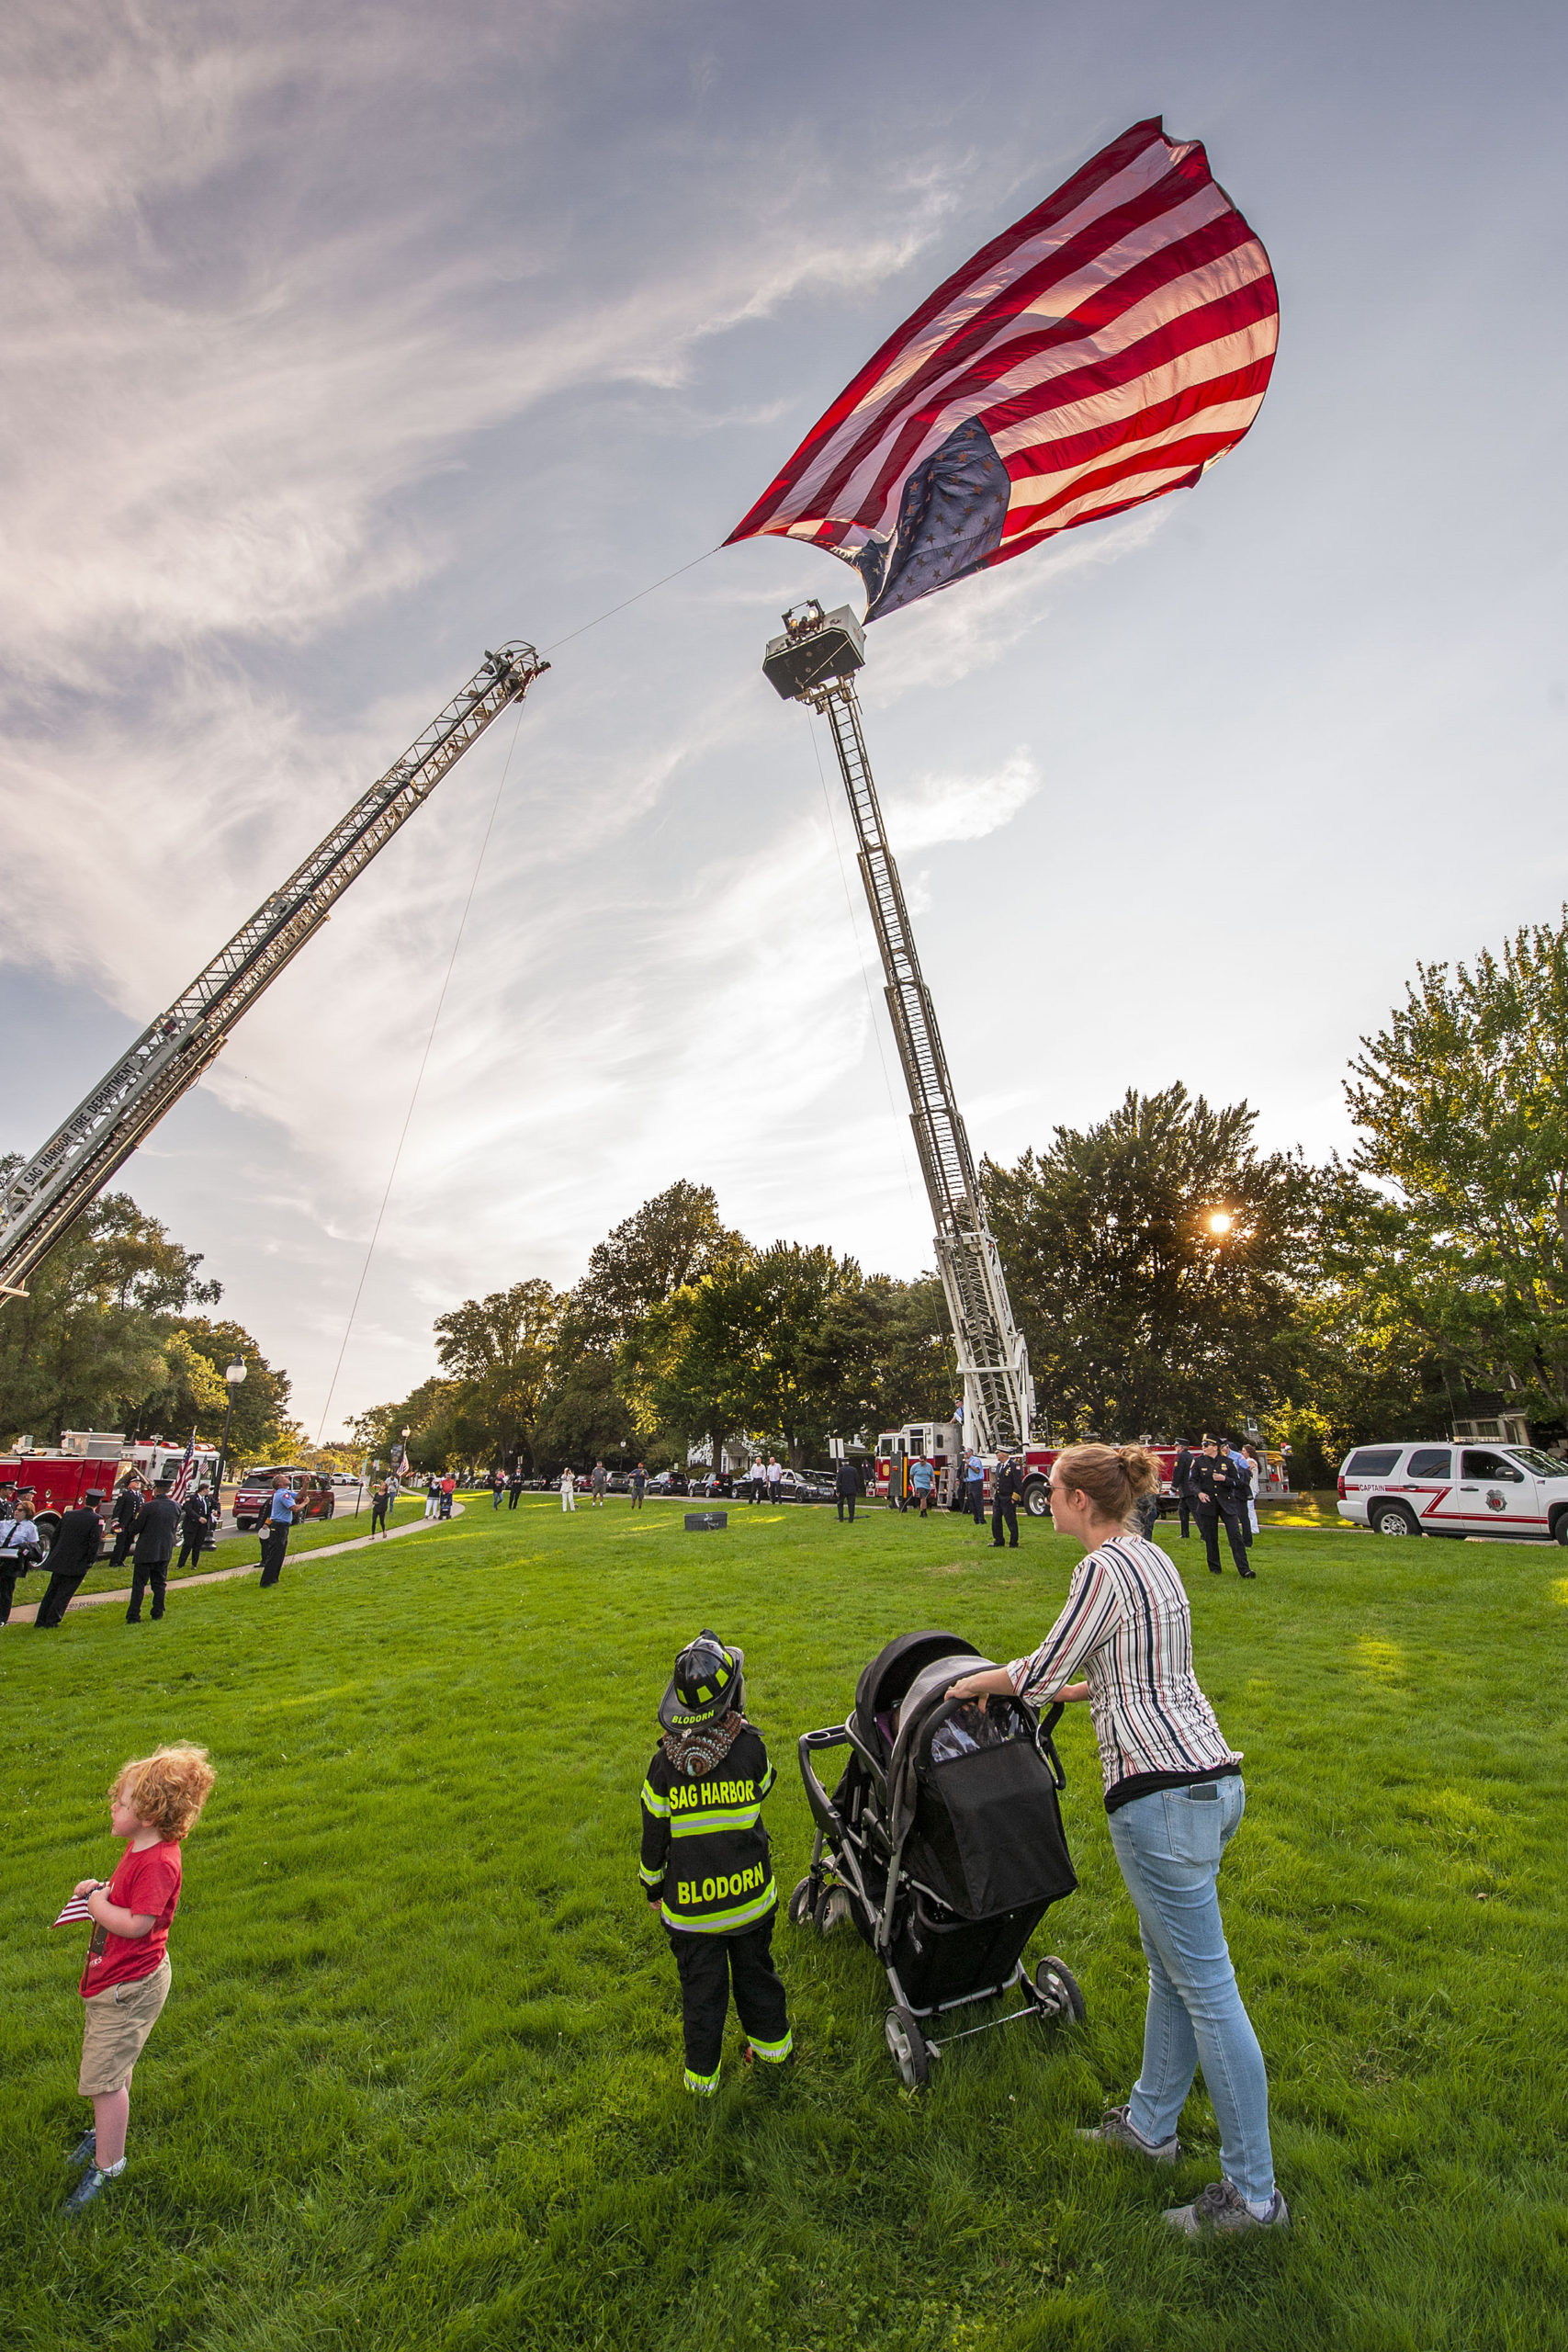 Five-year-old Connor Blodorn, son of Sag Harbor Fire Department Assistant Chief Andrew Blodorn, watches the American flag being raised by the East Hampton and Sag Harbor Fire Department ladder trucks prior to the start of the ceremony commemorating the 20th anniversary of the attack on the World Trade Center, held on the Village Green in East Hampton on Saturday afternoon.